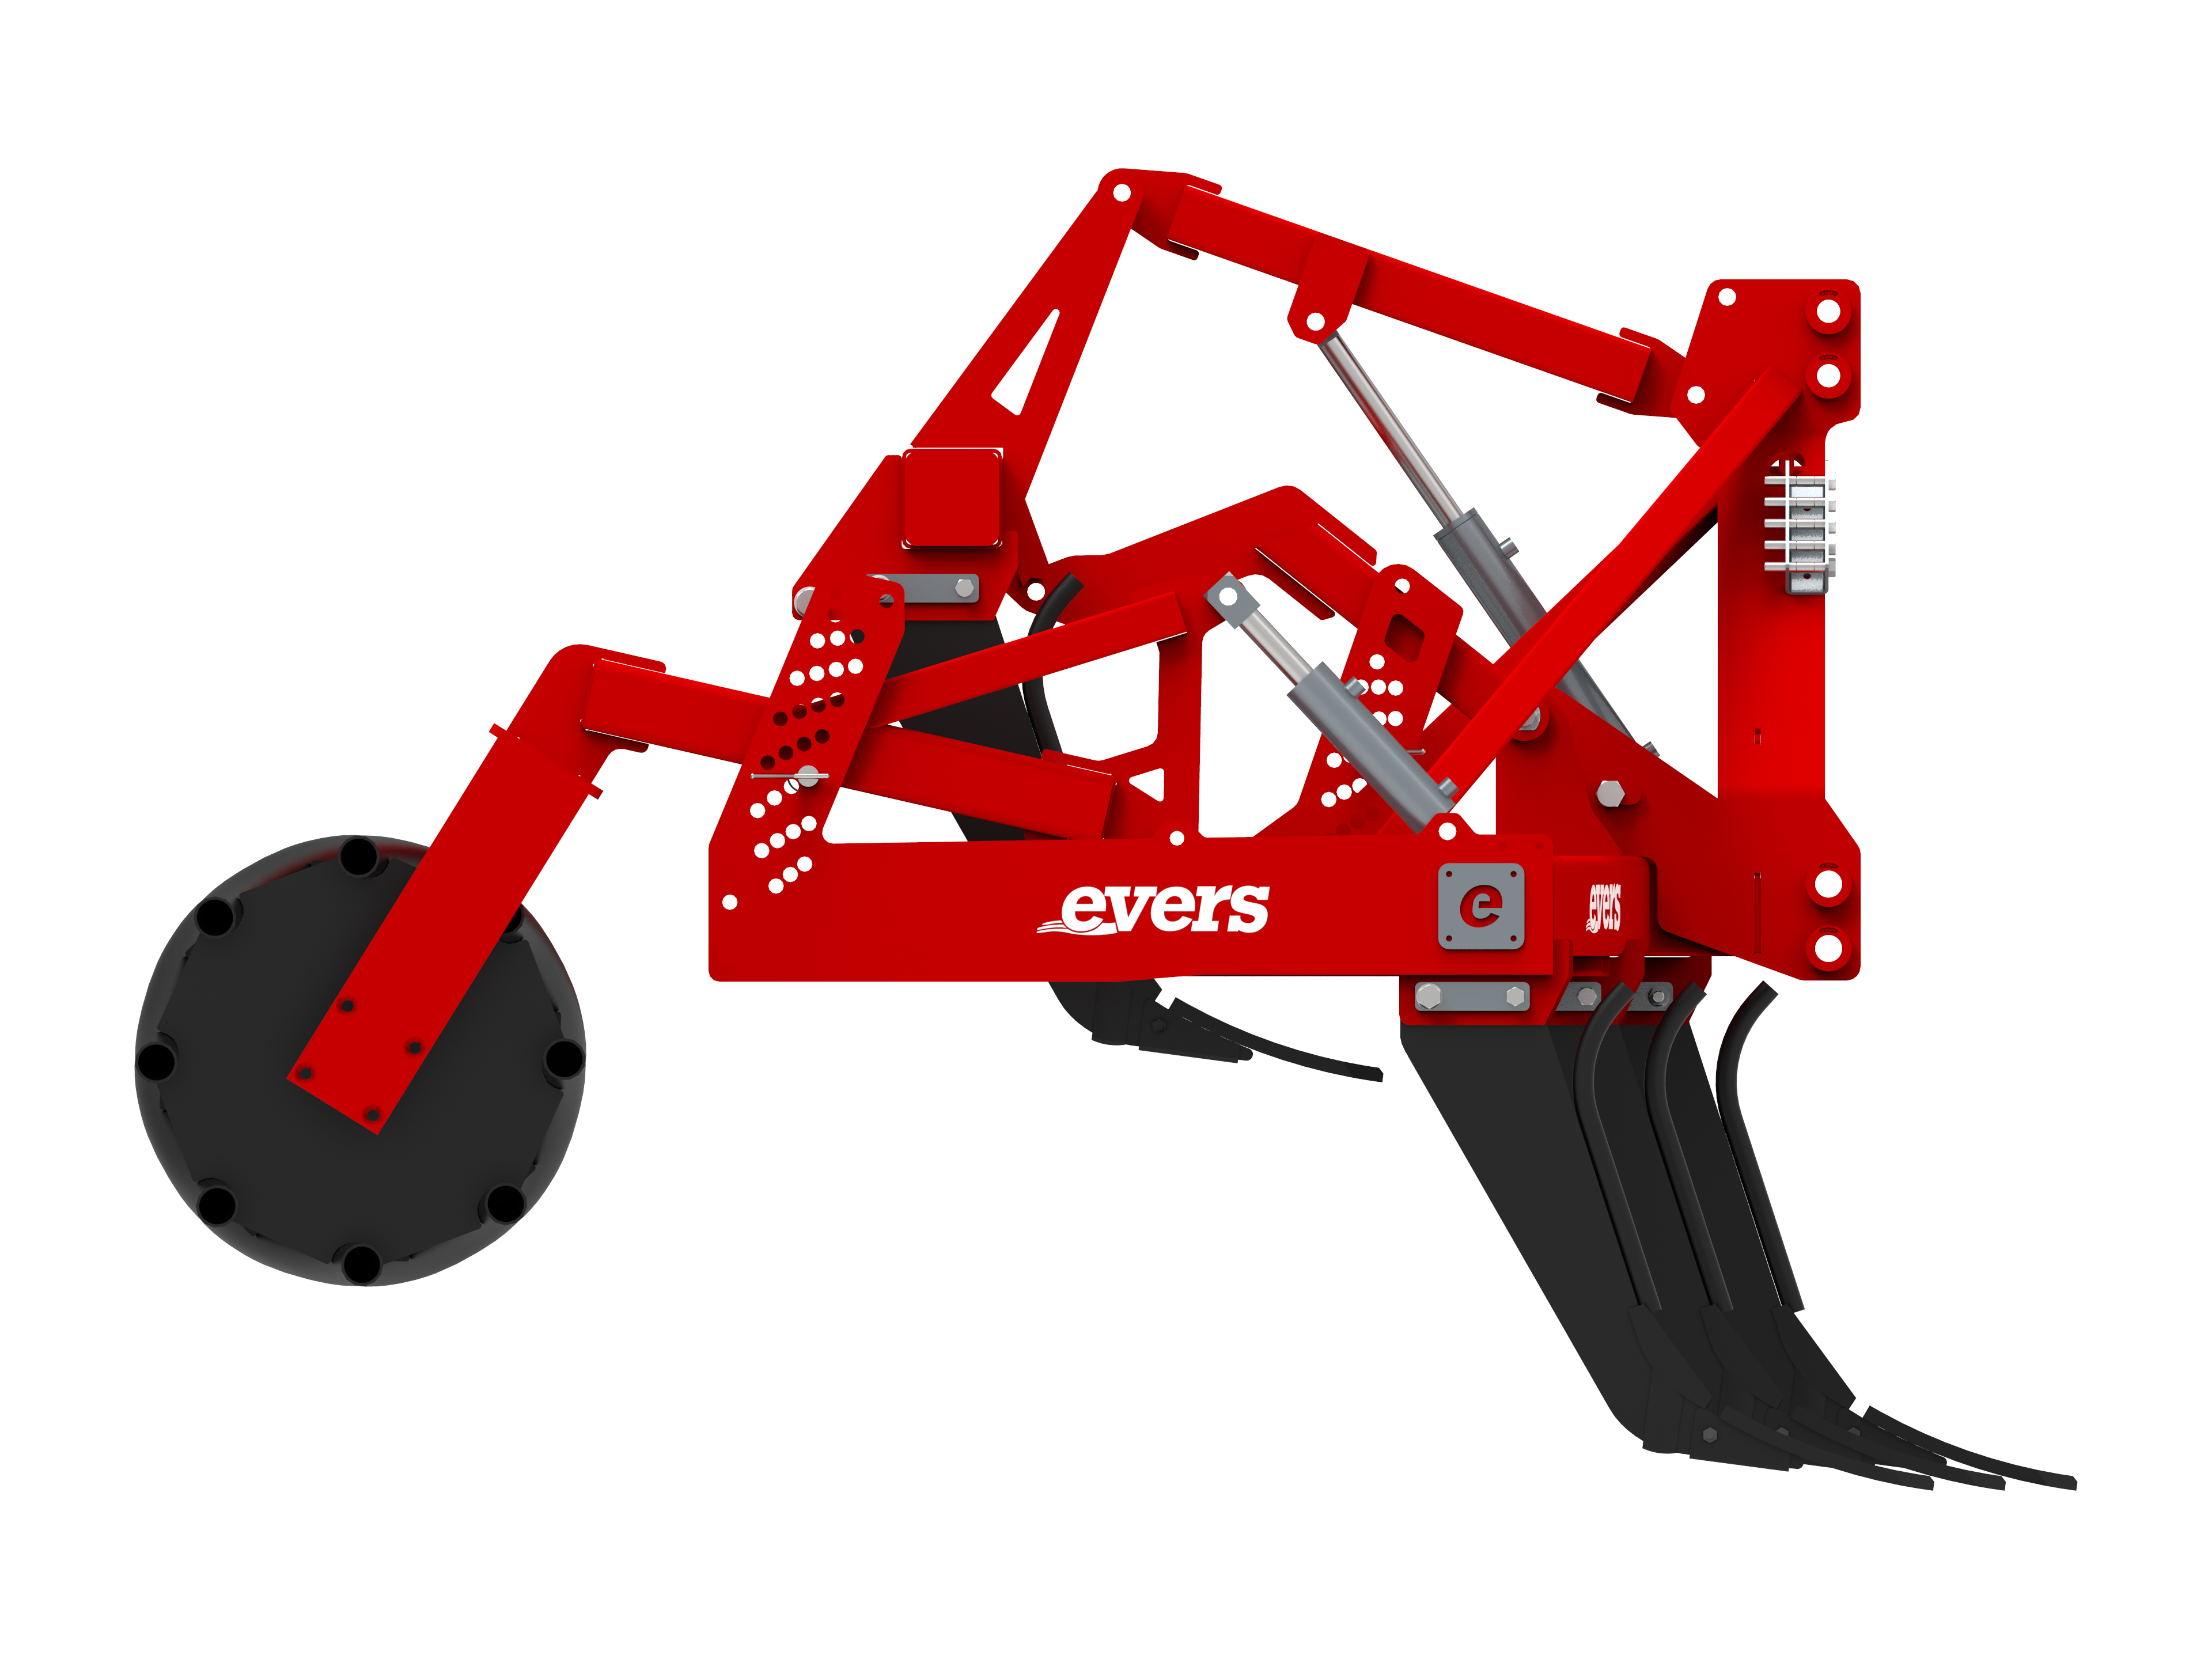 Evers Forest Vario Compaction Control, a multi-purpose cultivator with slip-dependent depth control